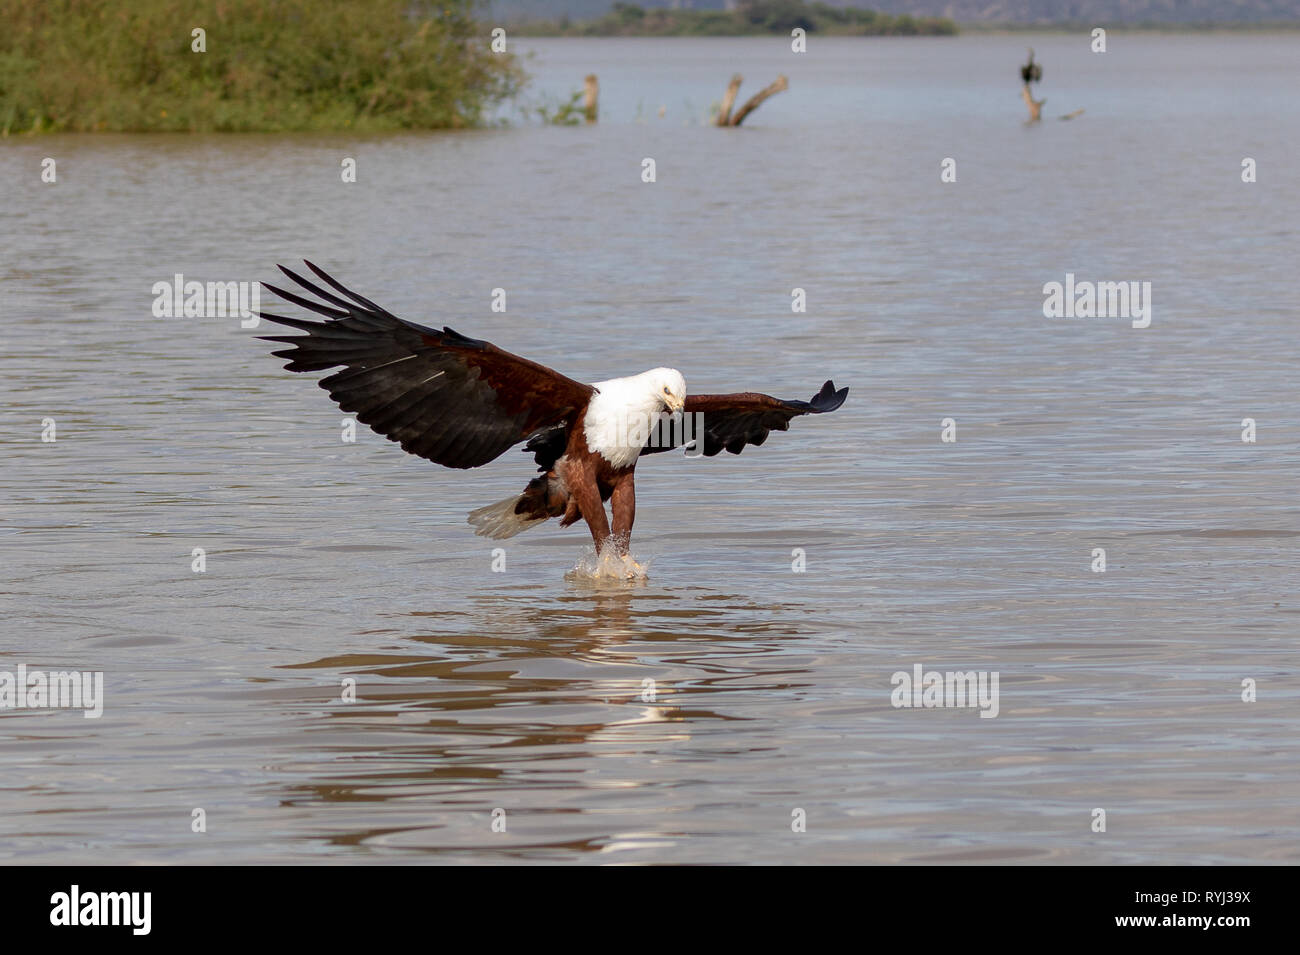 African Sea Eagle swooping for fish, Kenya, Africa Stock Photo